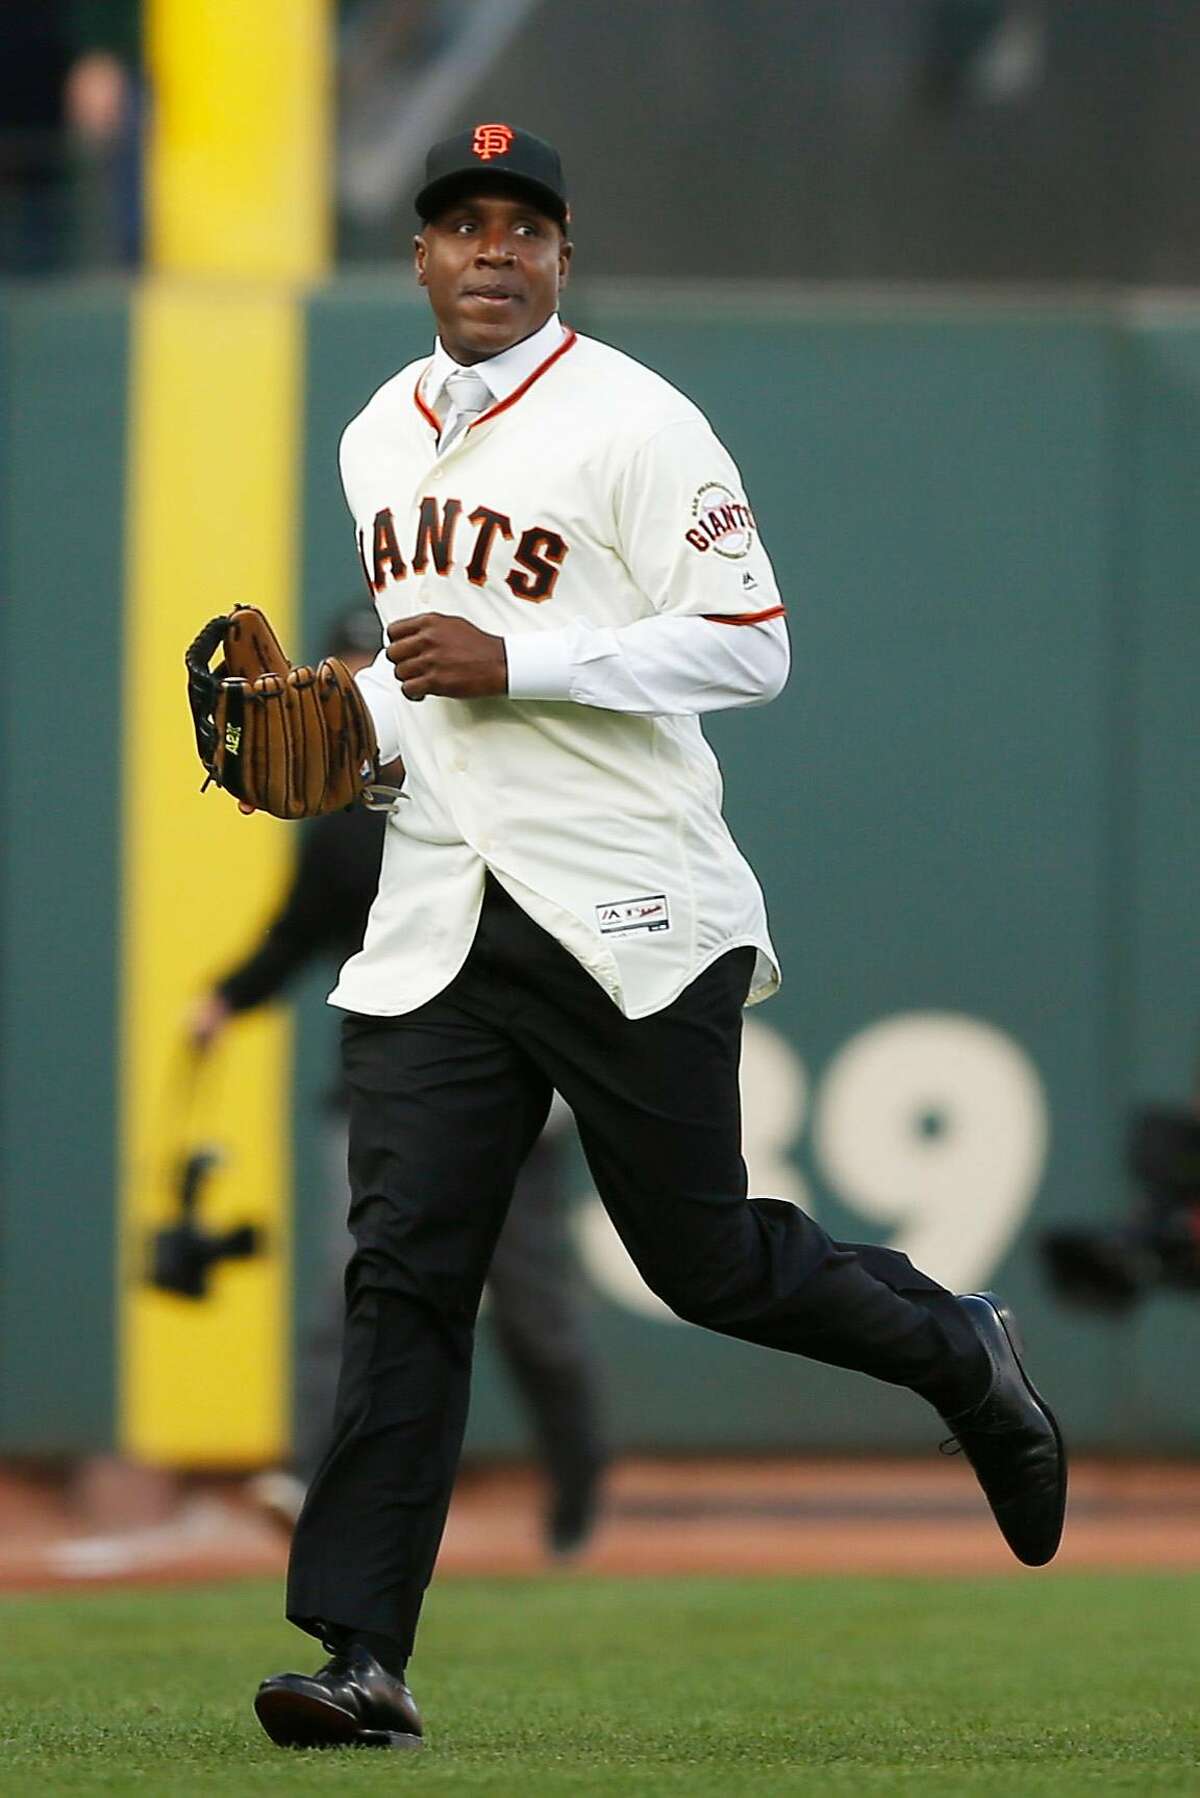 Barry Bonds acknowledges the crowd in the outfield during his uniform number retirement ceremony at AT&T Park on Saturday, Aug. 11, 2018, in San Francisco, Calif. The San Francisco Giants retired number 25 in honor of Bonds' historic career with the Giants from 1993-2007.